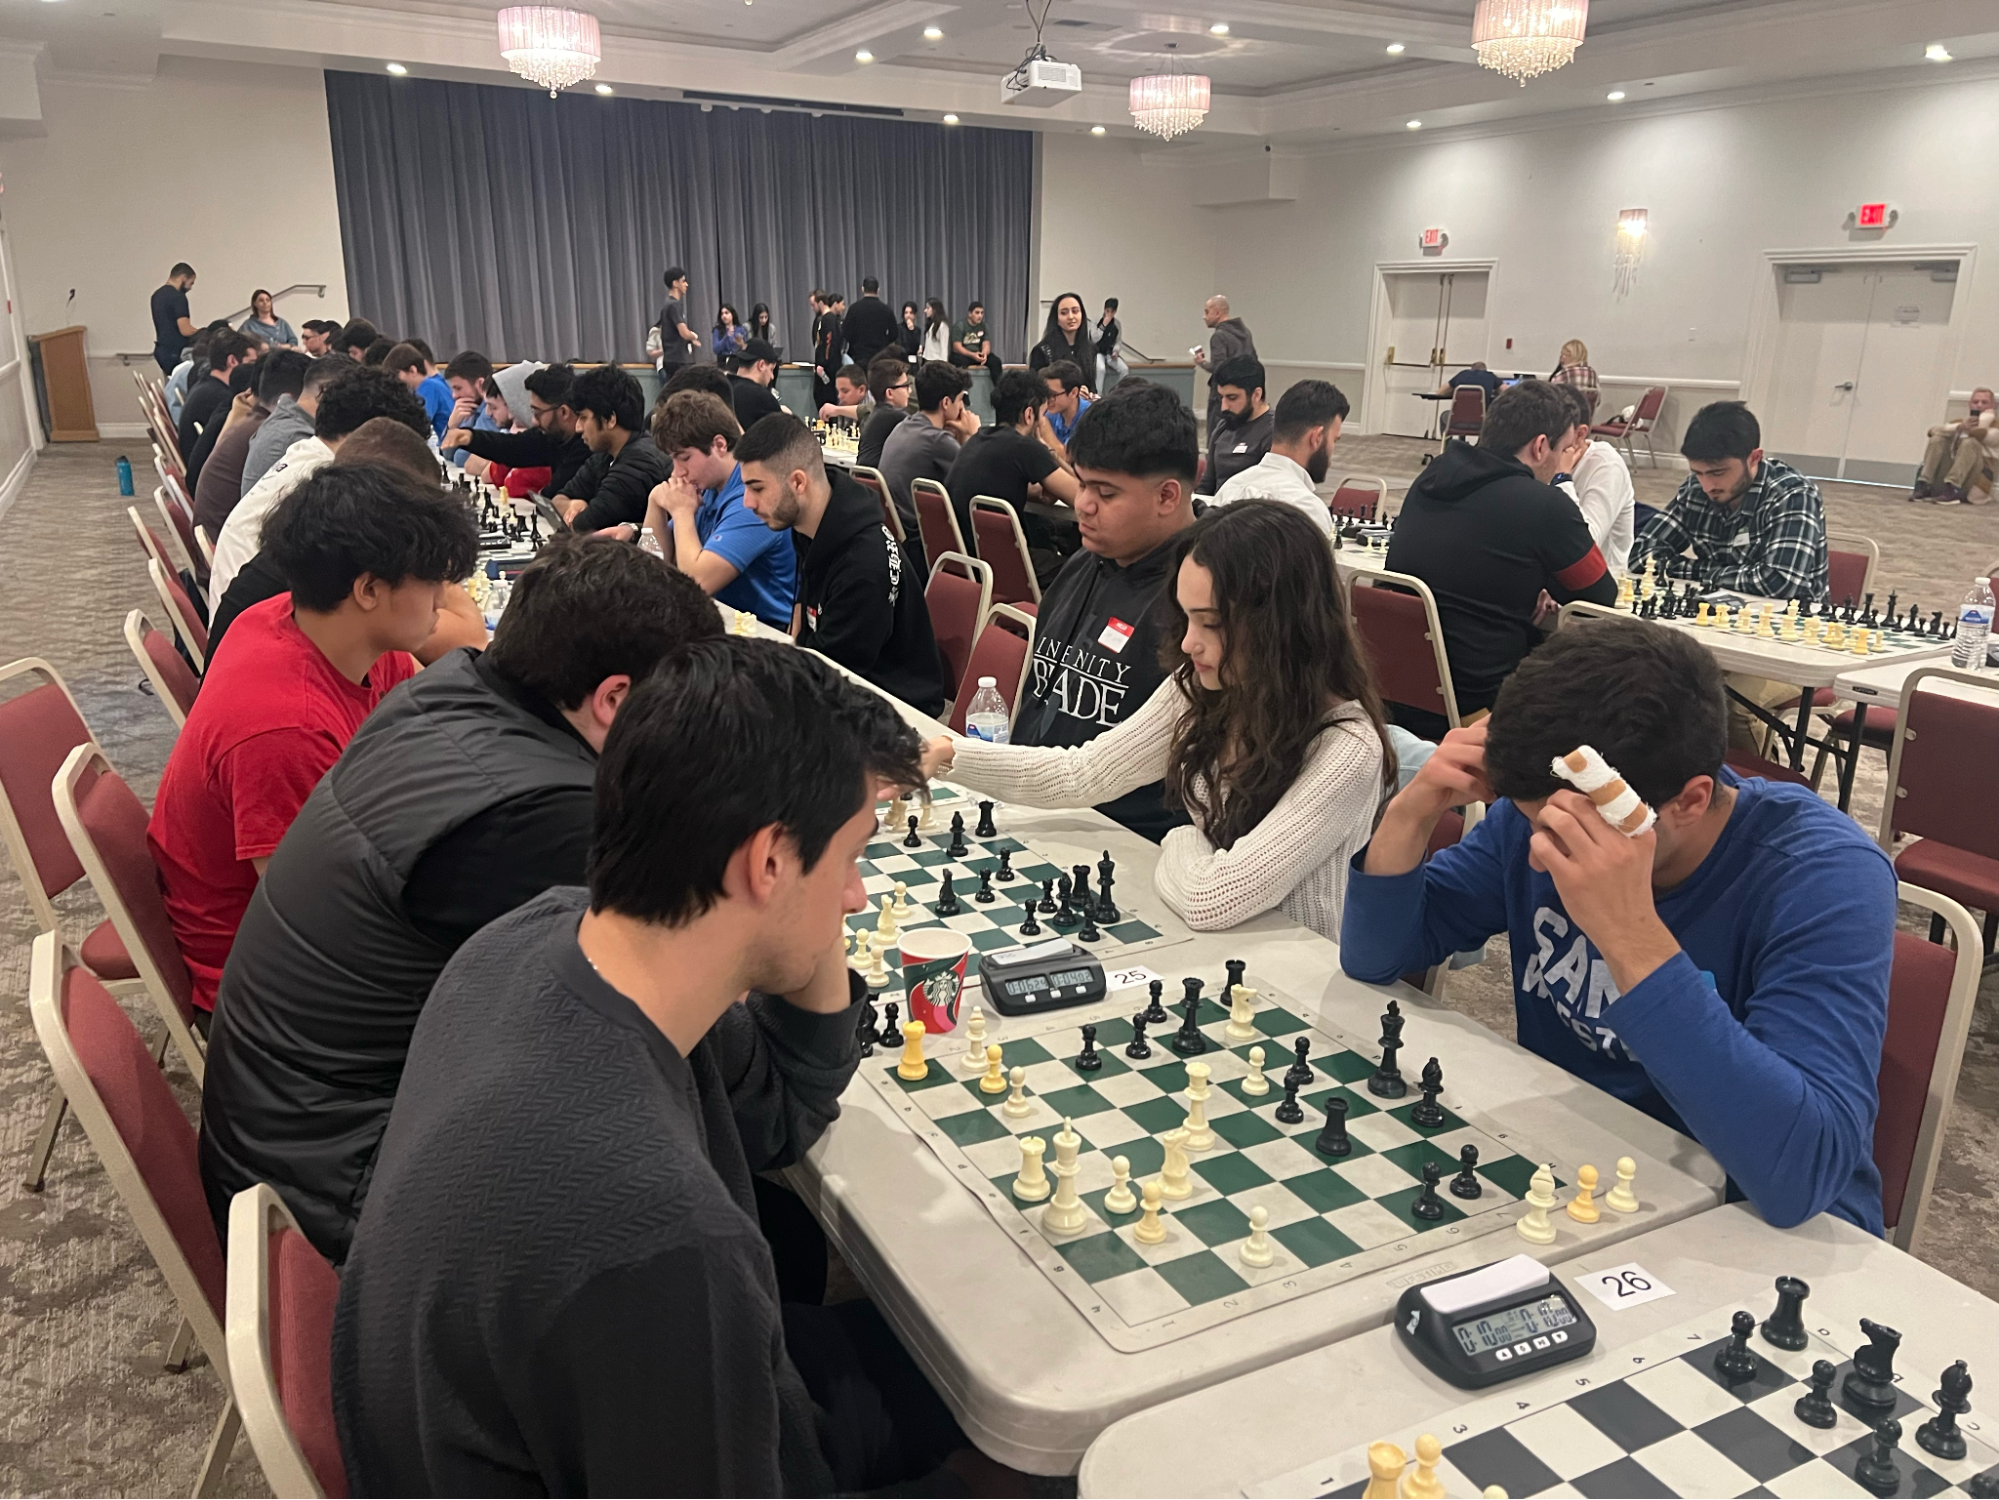 LA students gather to play chess for Artsakh